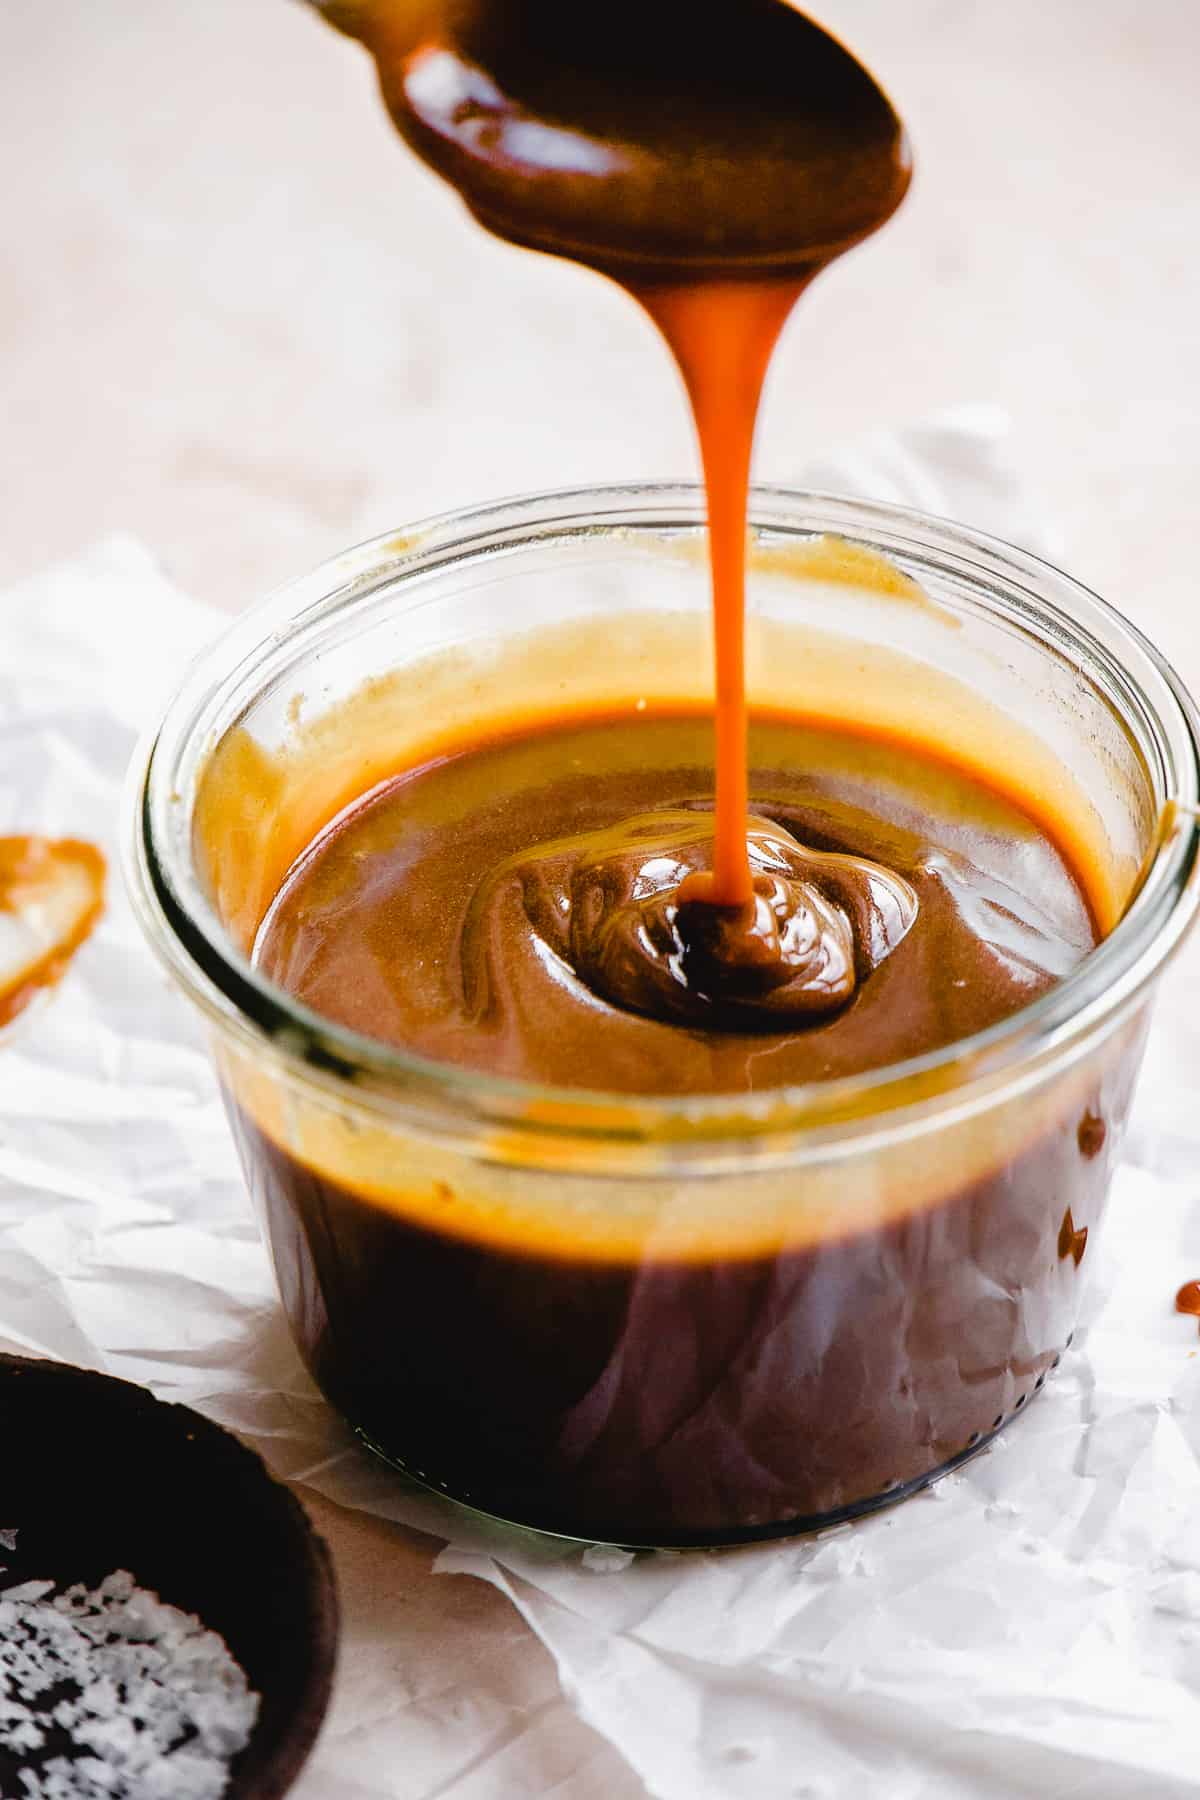 Dairy free caramel dripping off a spoon and running into a glass container.